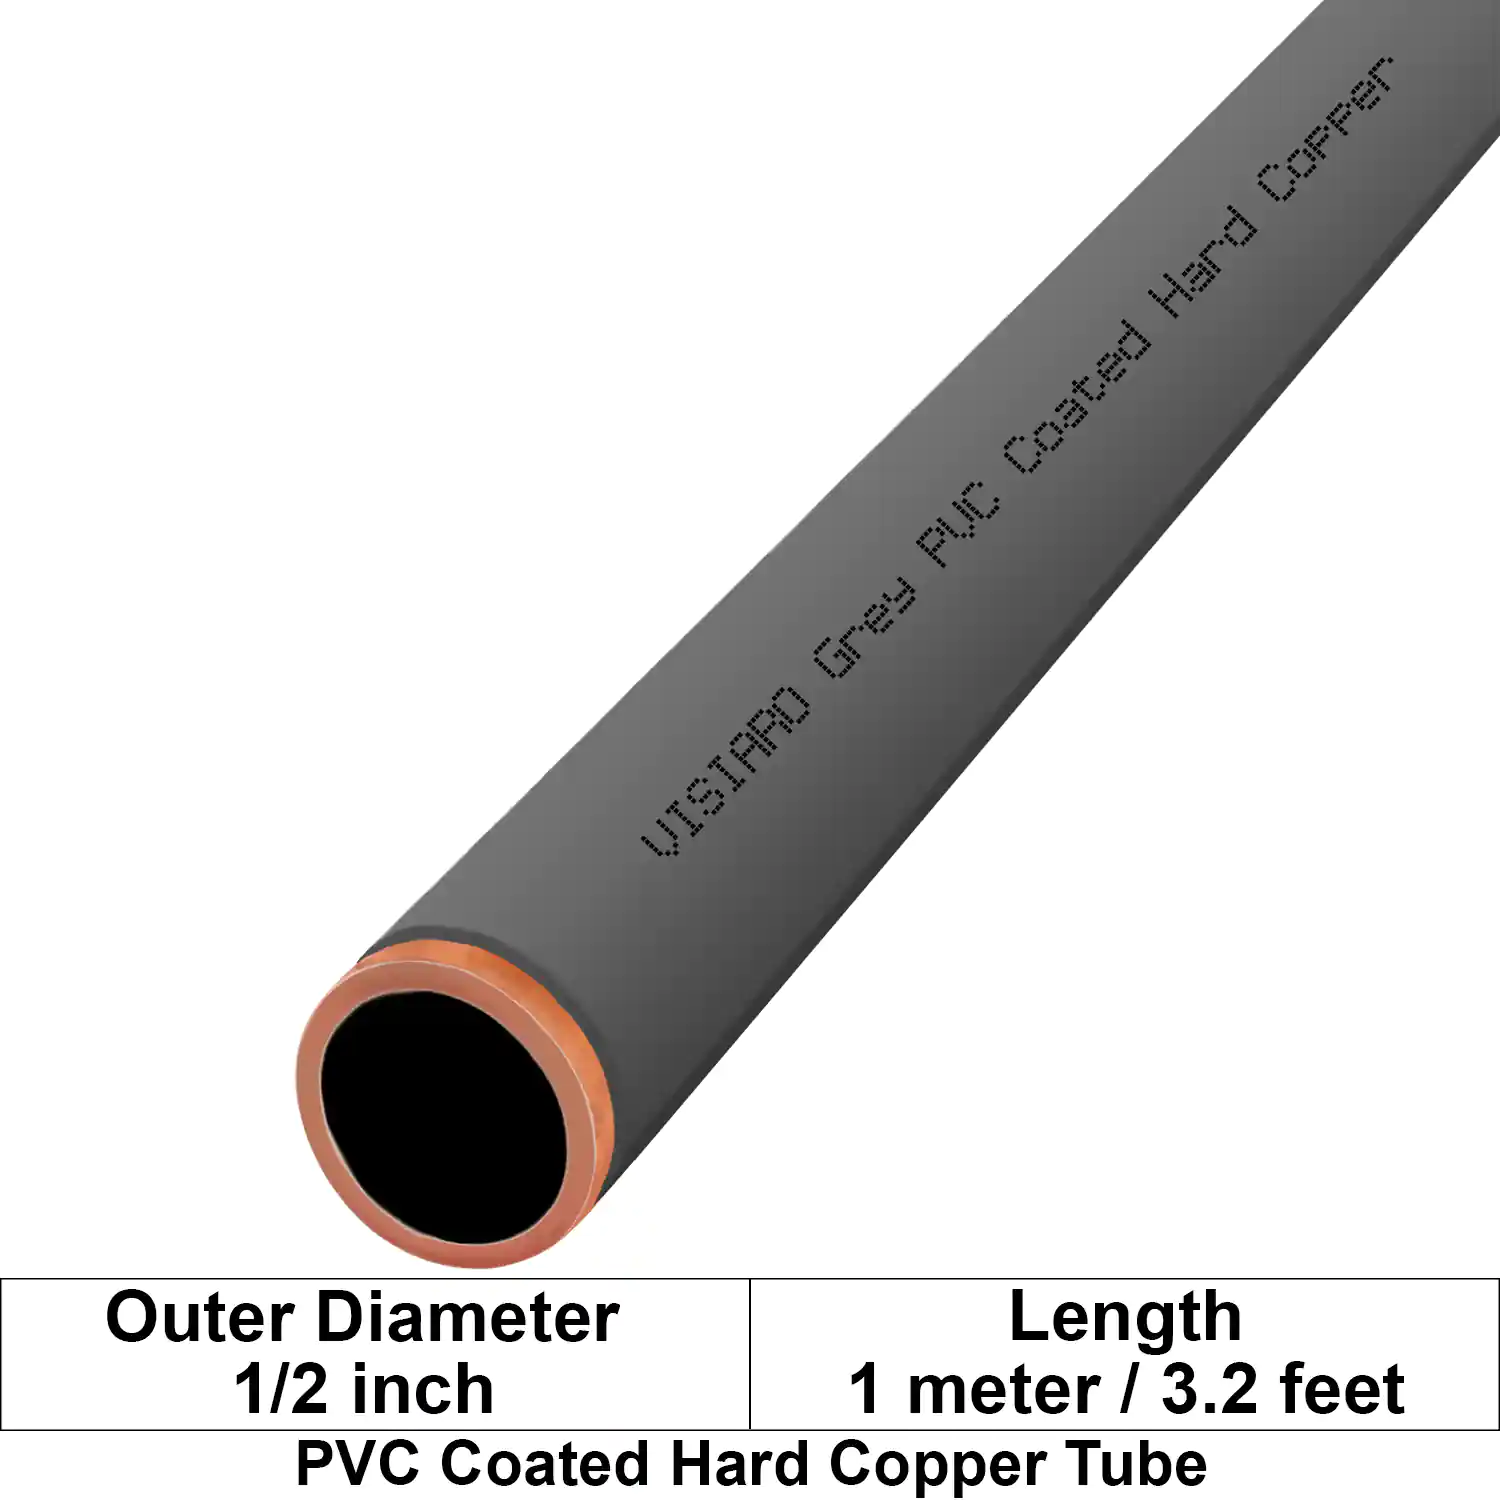 Visiaro Grey PVC Coated Hard Copper Tube 1mtr long Outer Diameter - 1/2 inch